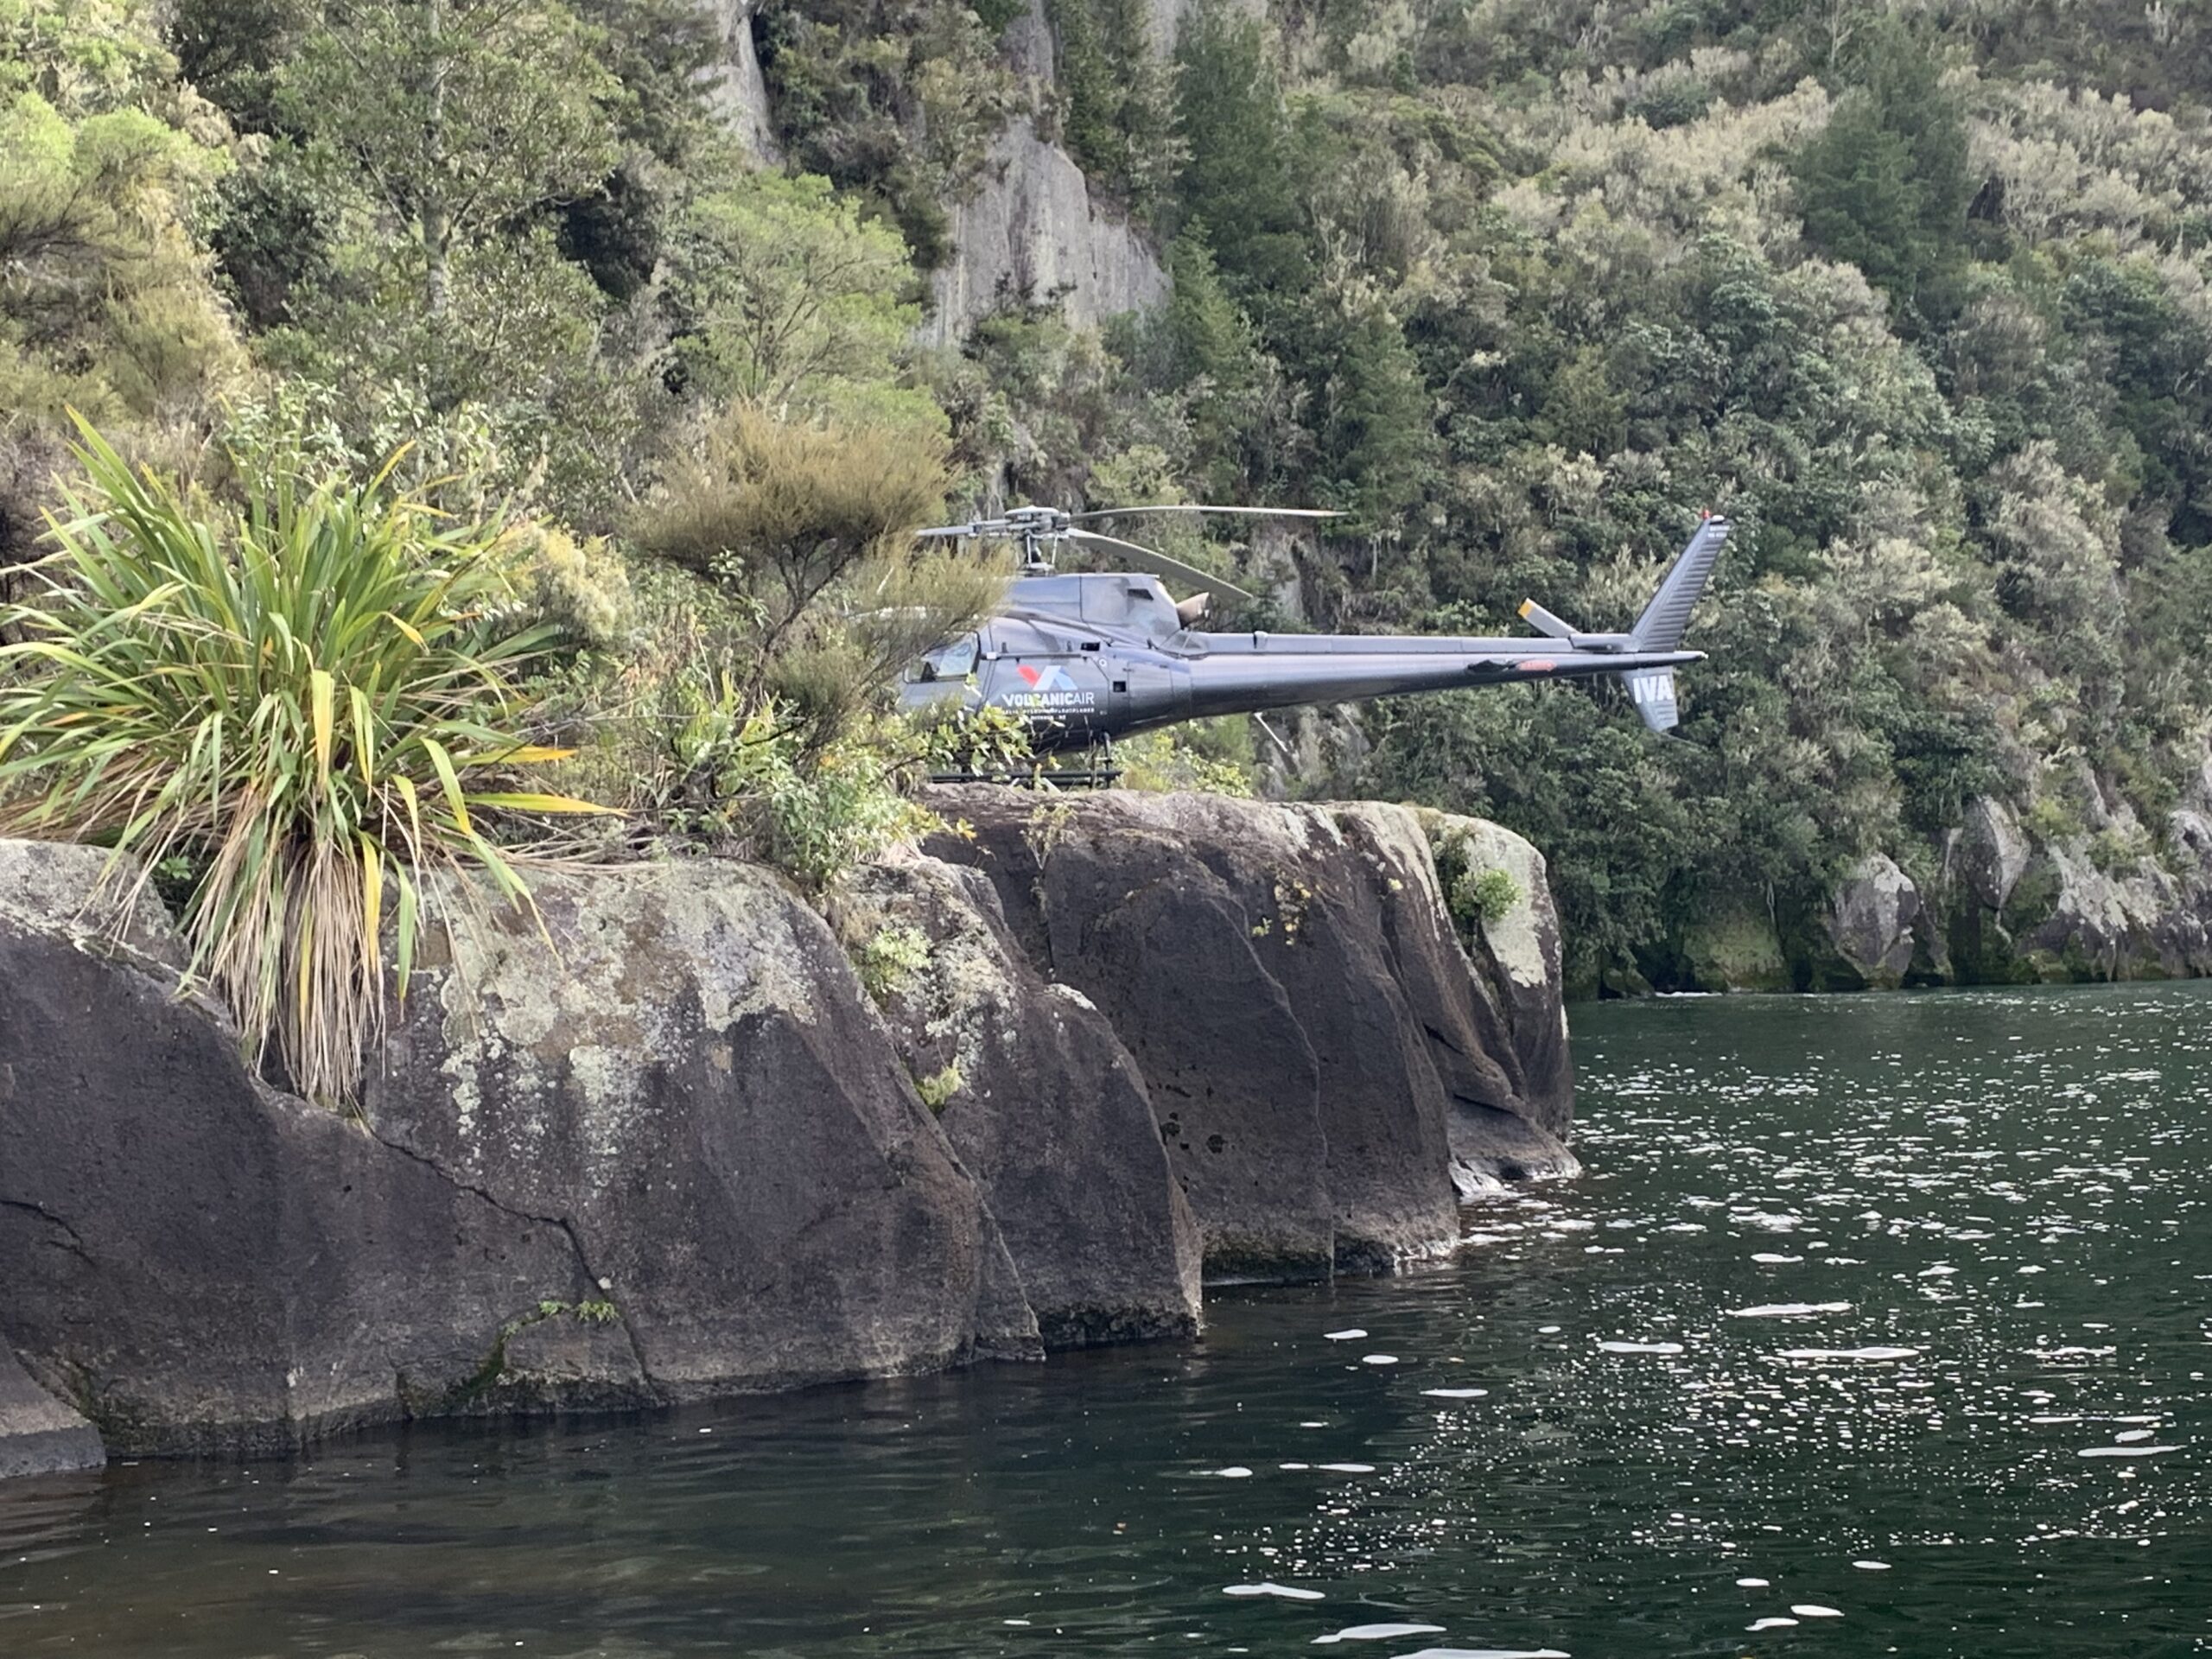 Helicopter landed on Flat Rock by thelake